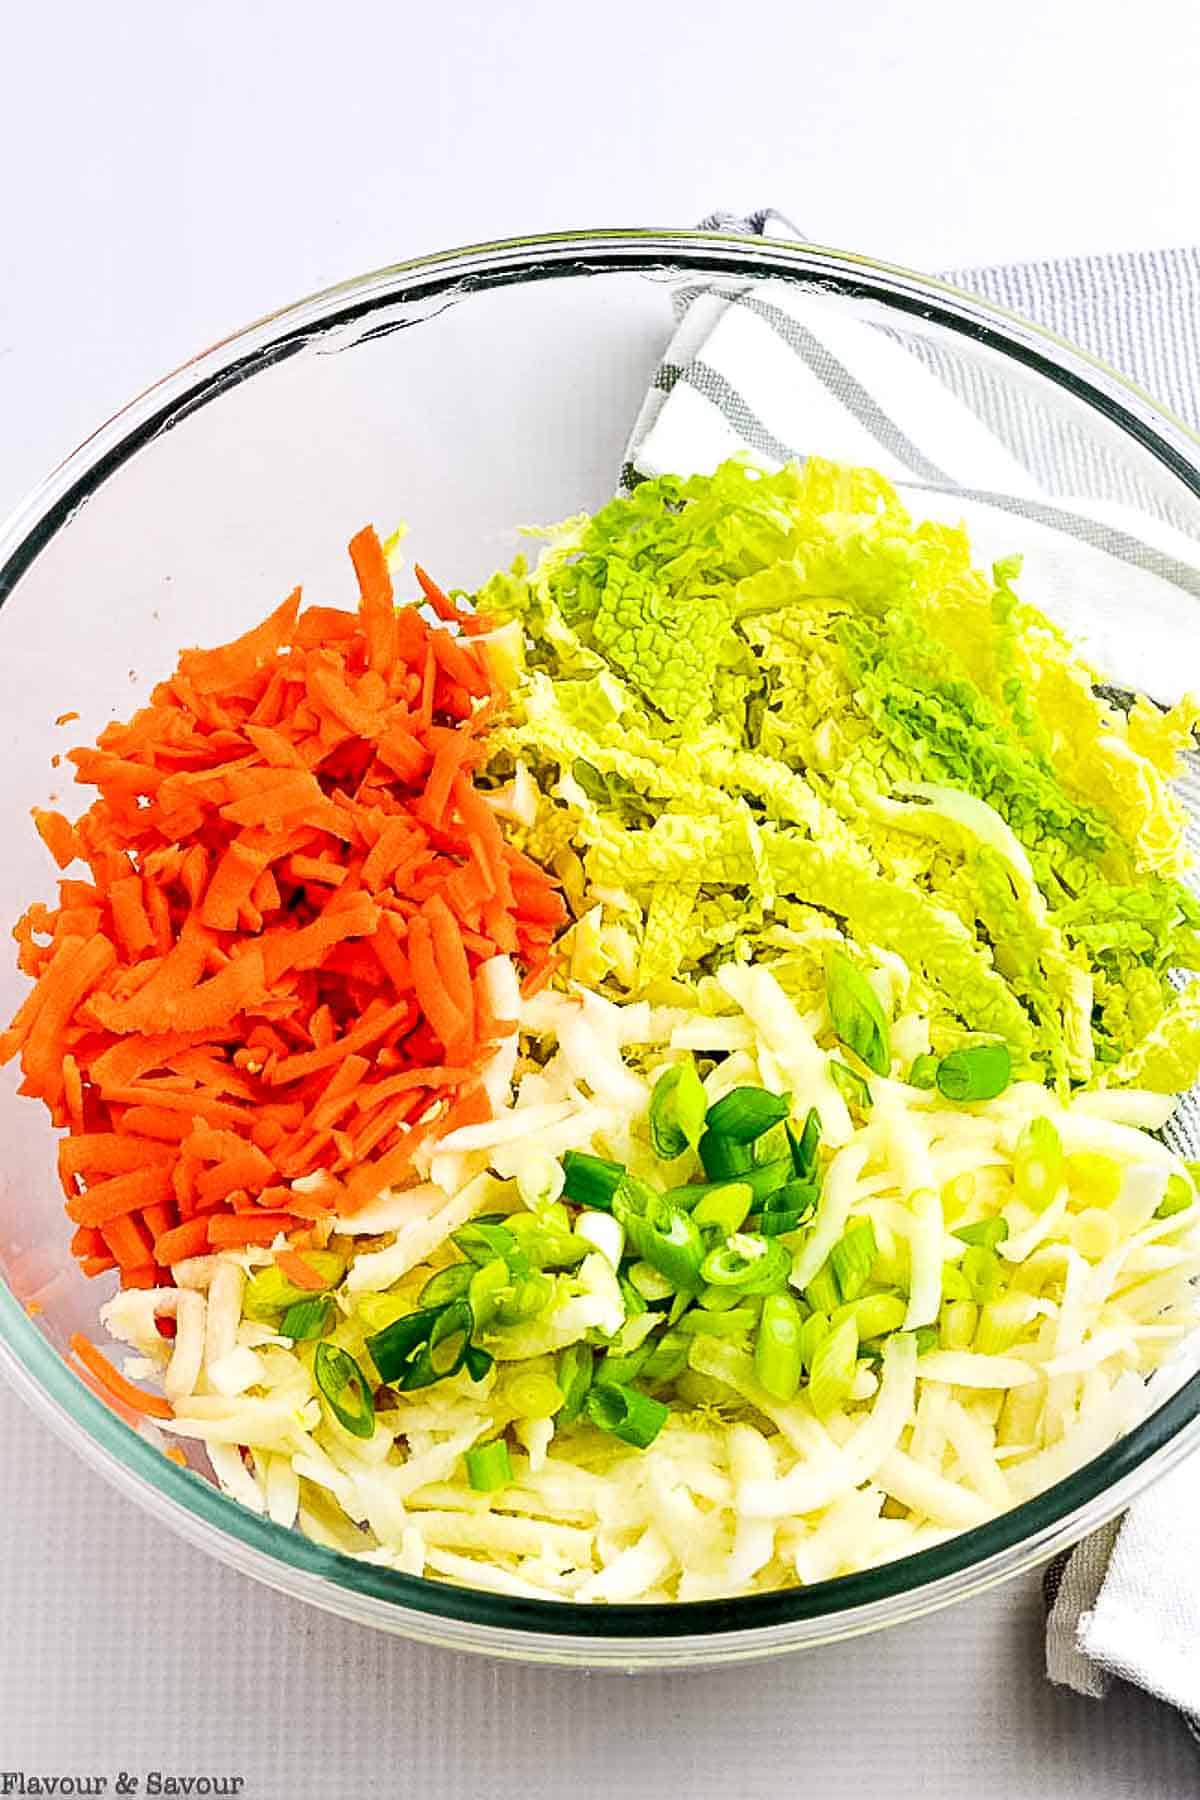 A glass bowl of shredded cabbage, carrots, kohlrabi and green onions.